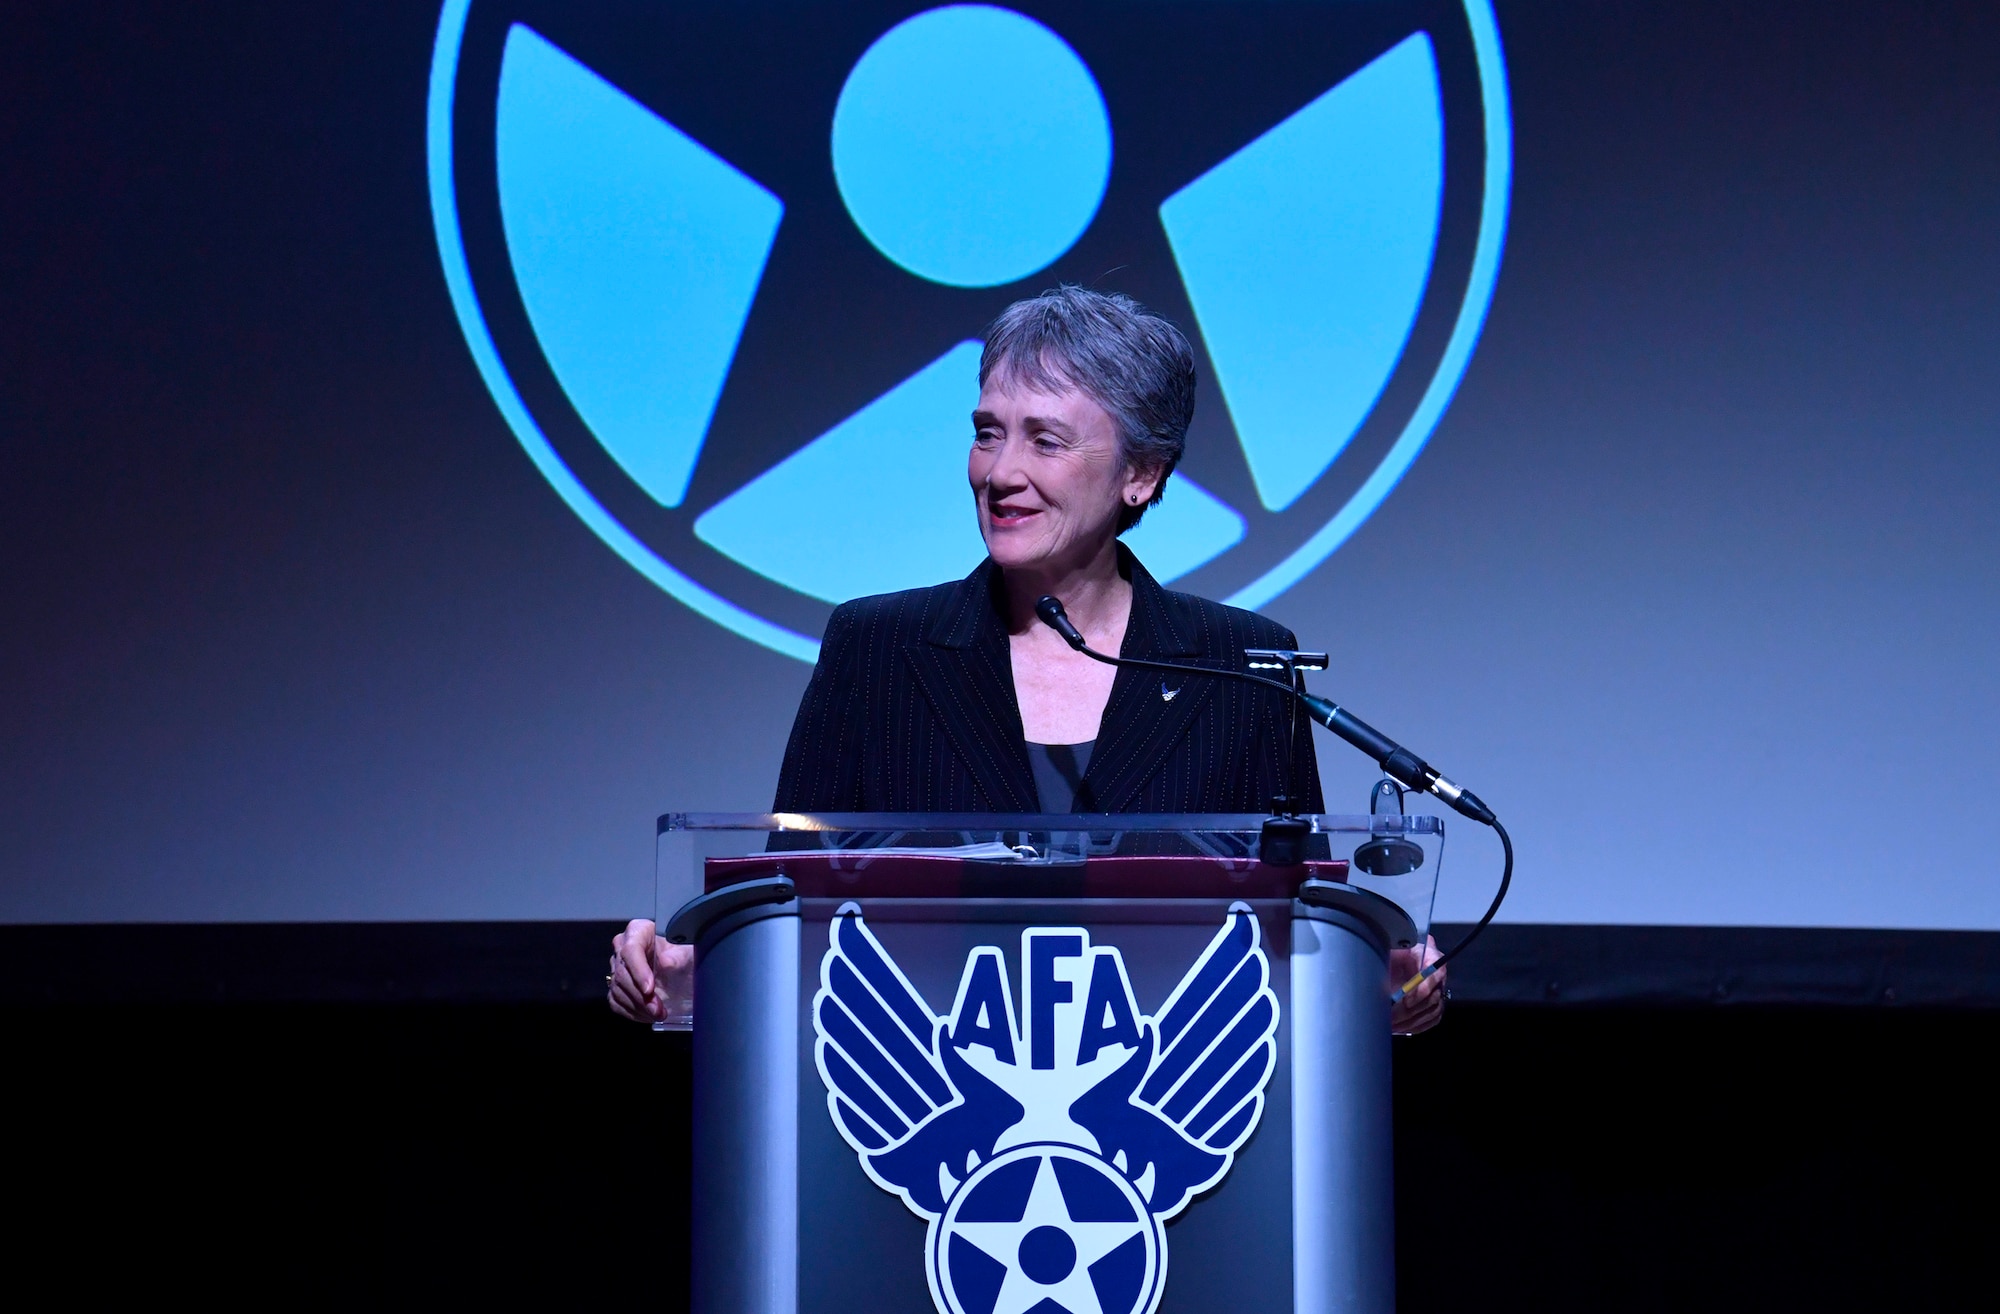 Secretary of the Air Force Heather Wilson gives remarks during the Air Force Association’s Air, Space and Cyber Conference in Orlando, Fla., Feb. 28, 2019. (U.S. Air Force photo by Wayne Clark)